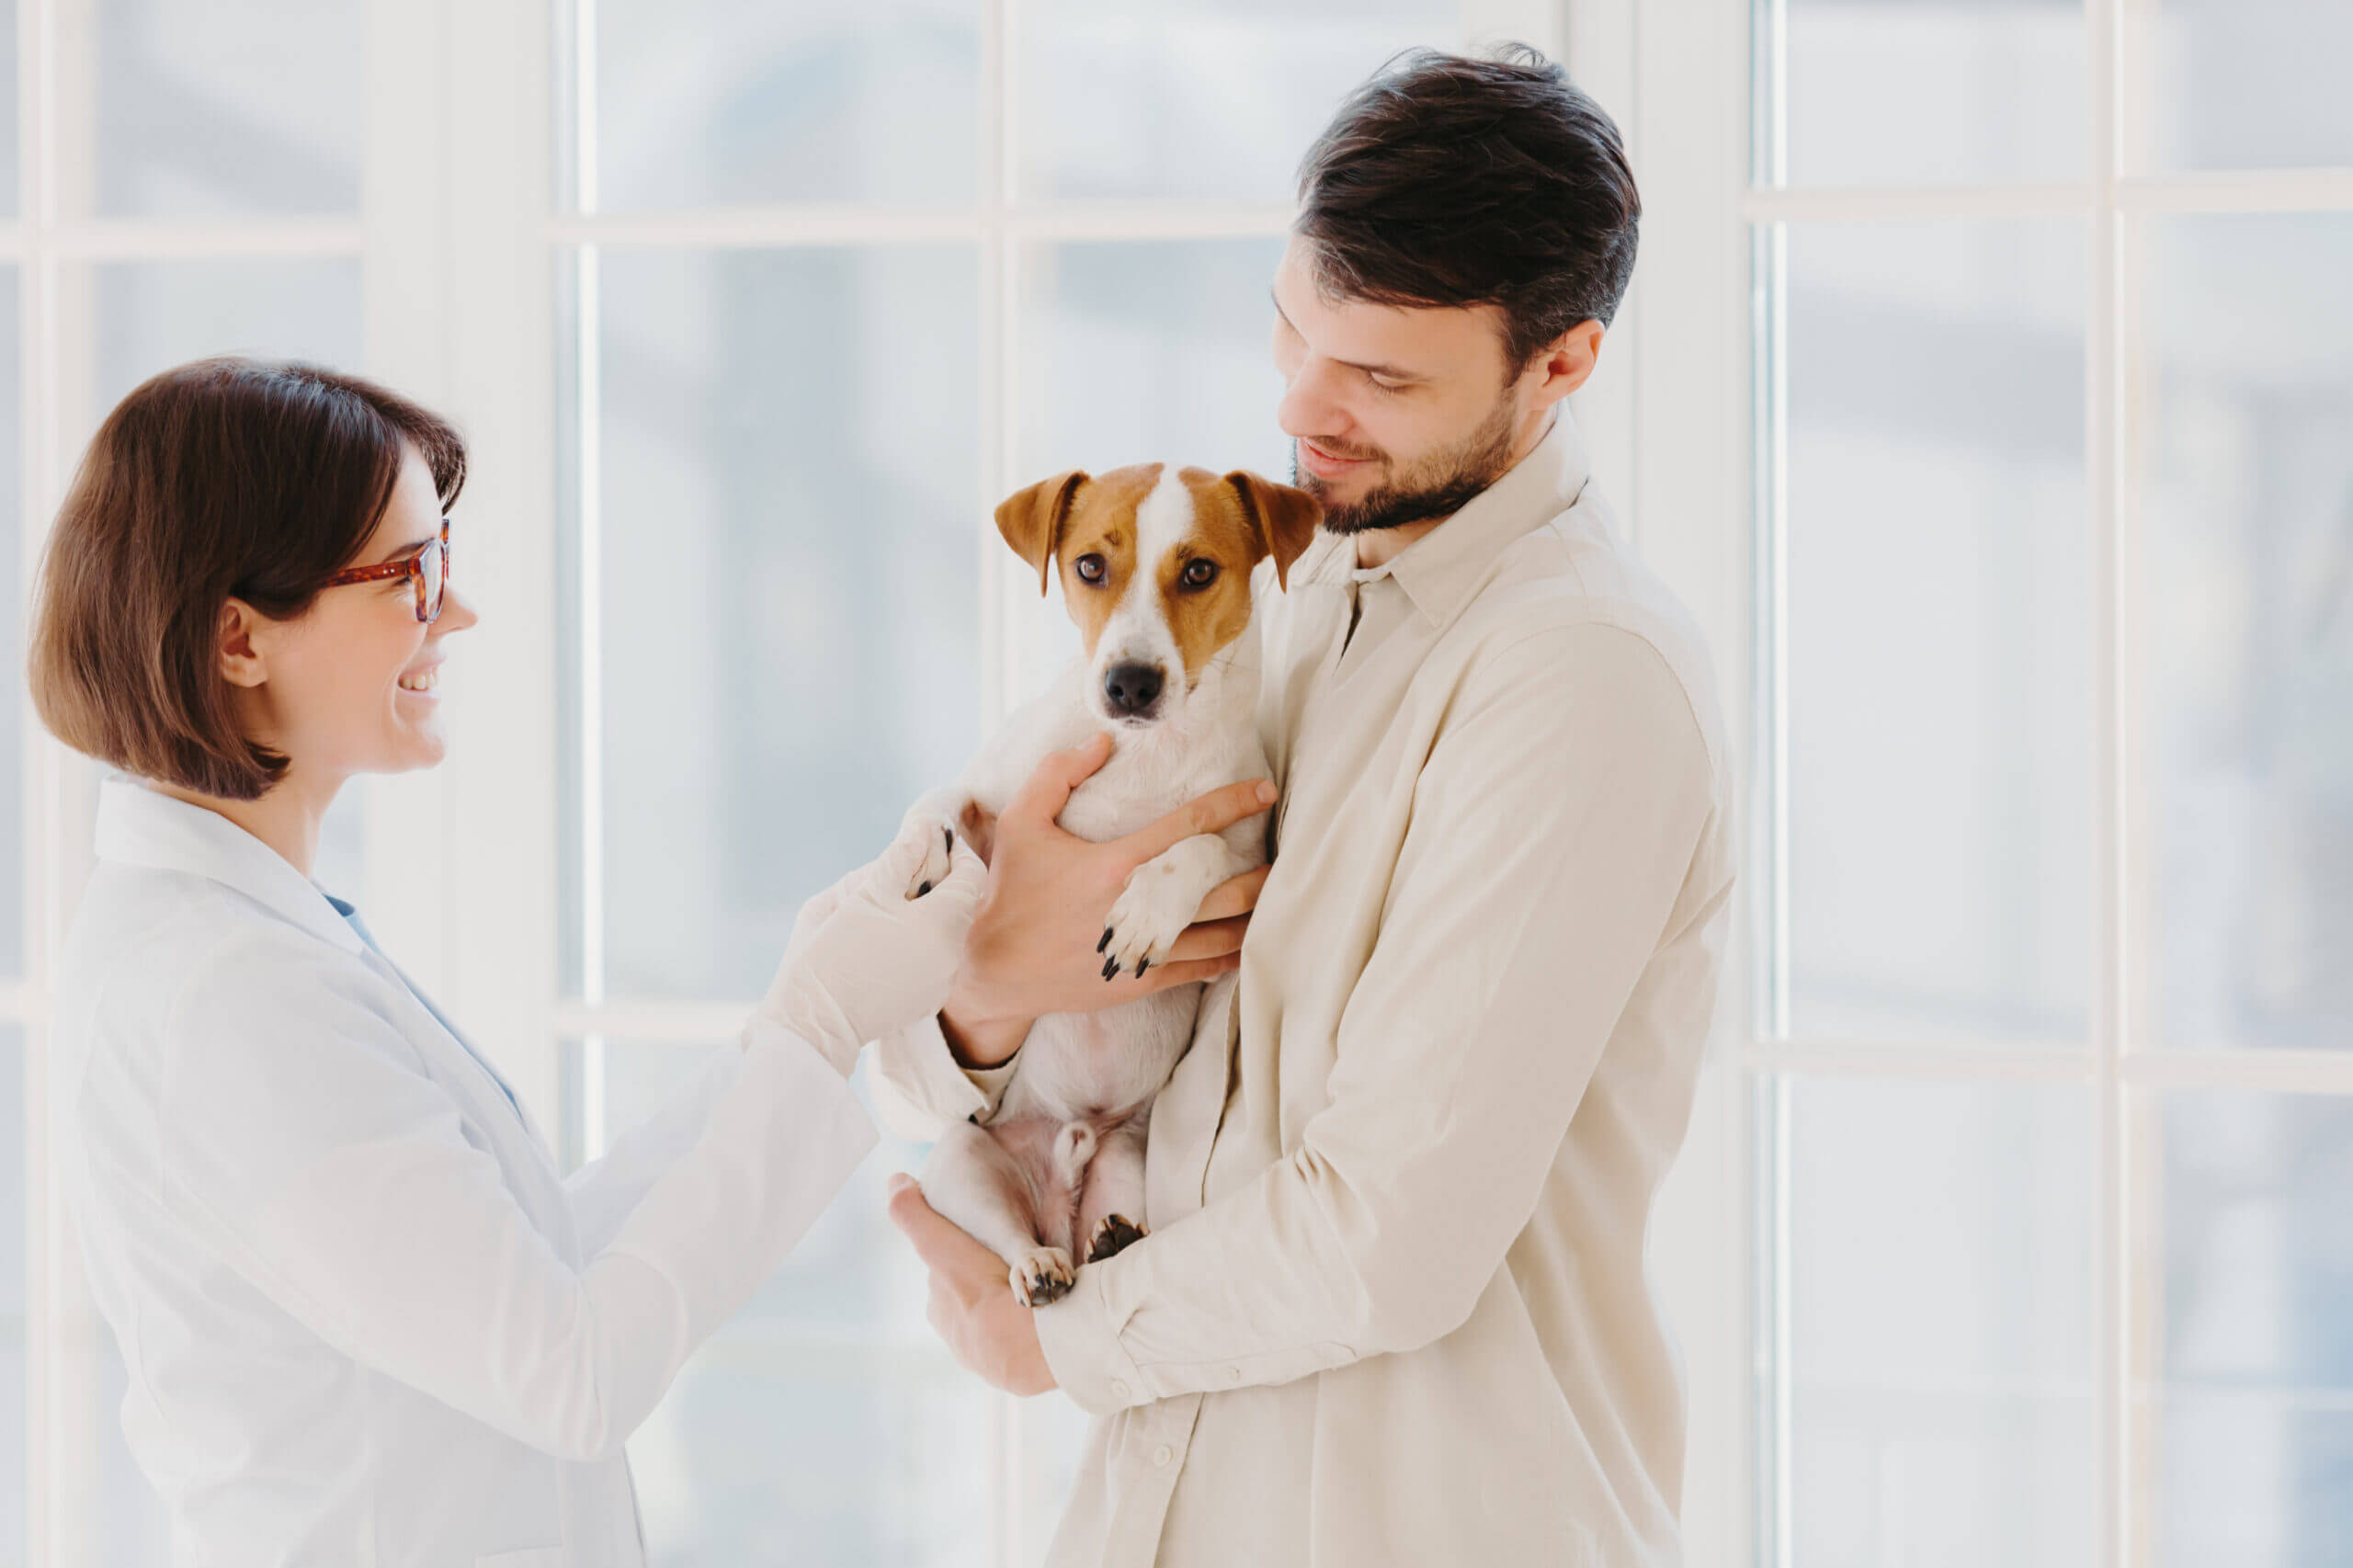 Horizontal shot of caring dog owner carries pet on hands, shows to animal specialist. Jack russell terrier being examined by vet in private clinic, stand indoor against window. Vet examining